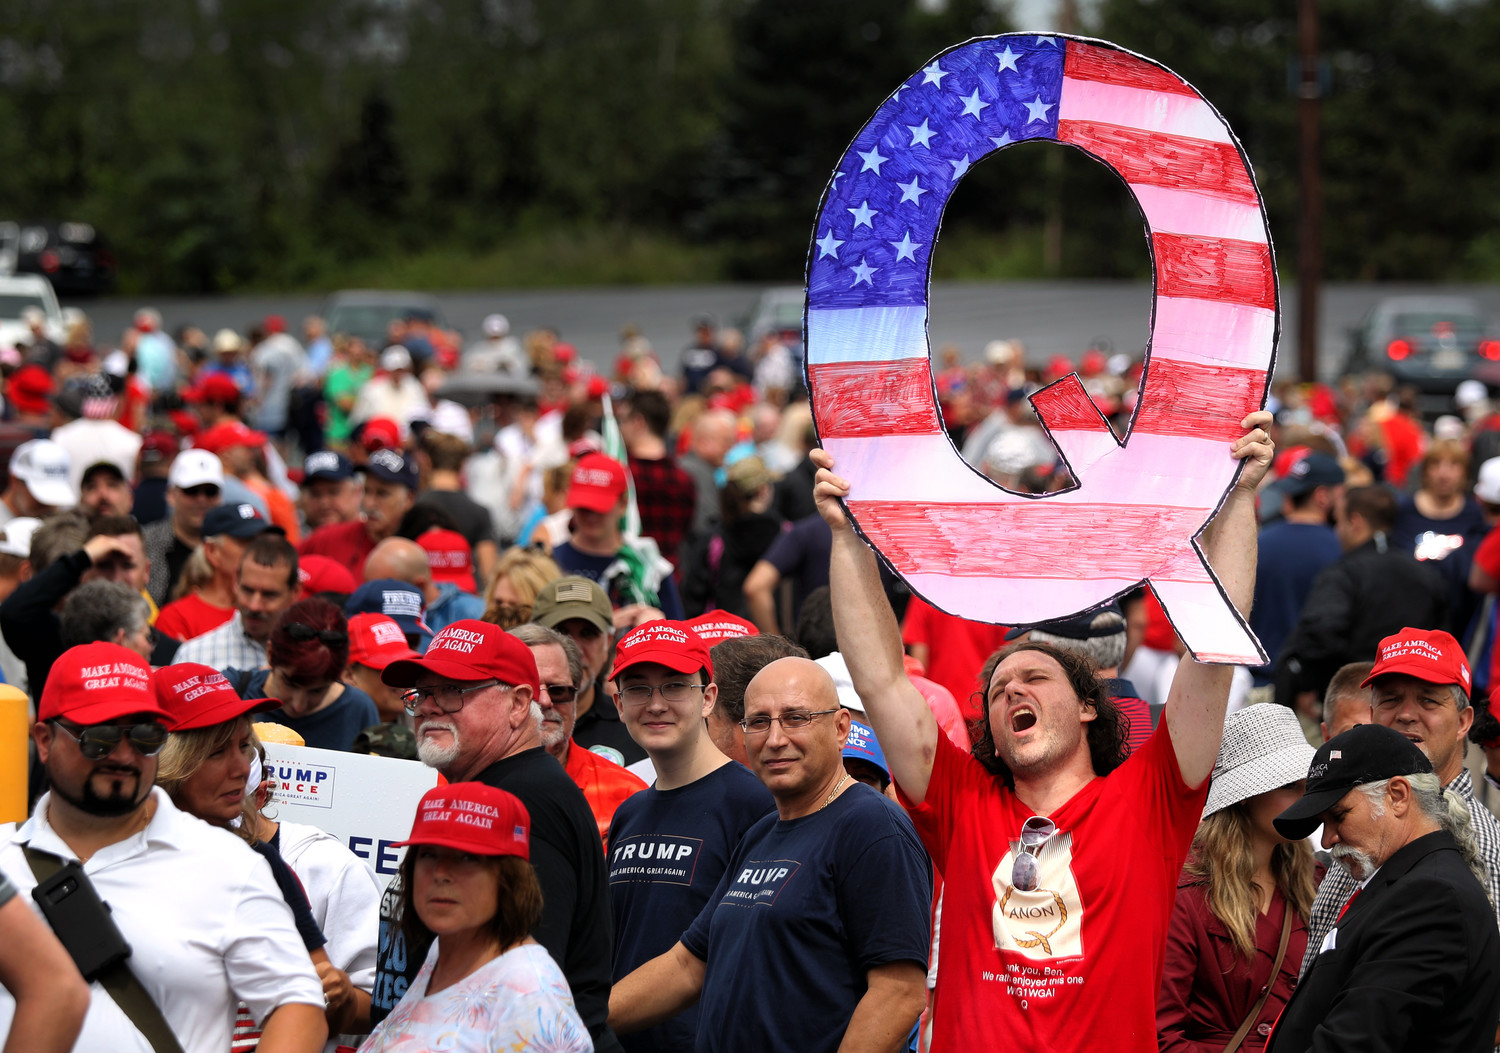 David Reinert holds up a large “Q” sign representing QAnon, a conspiracy group, while waiting in line to see President Donald Trump at a rally in Wilkes-Barre, Pa., on Aug. 2.